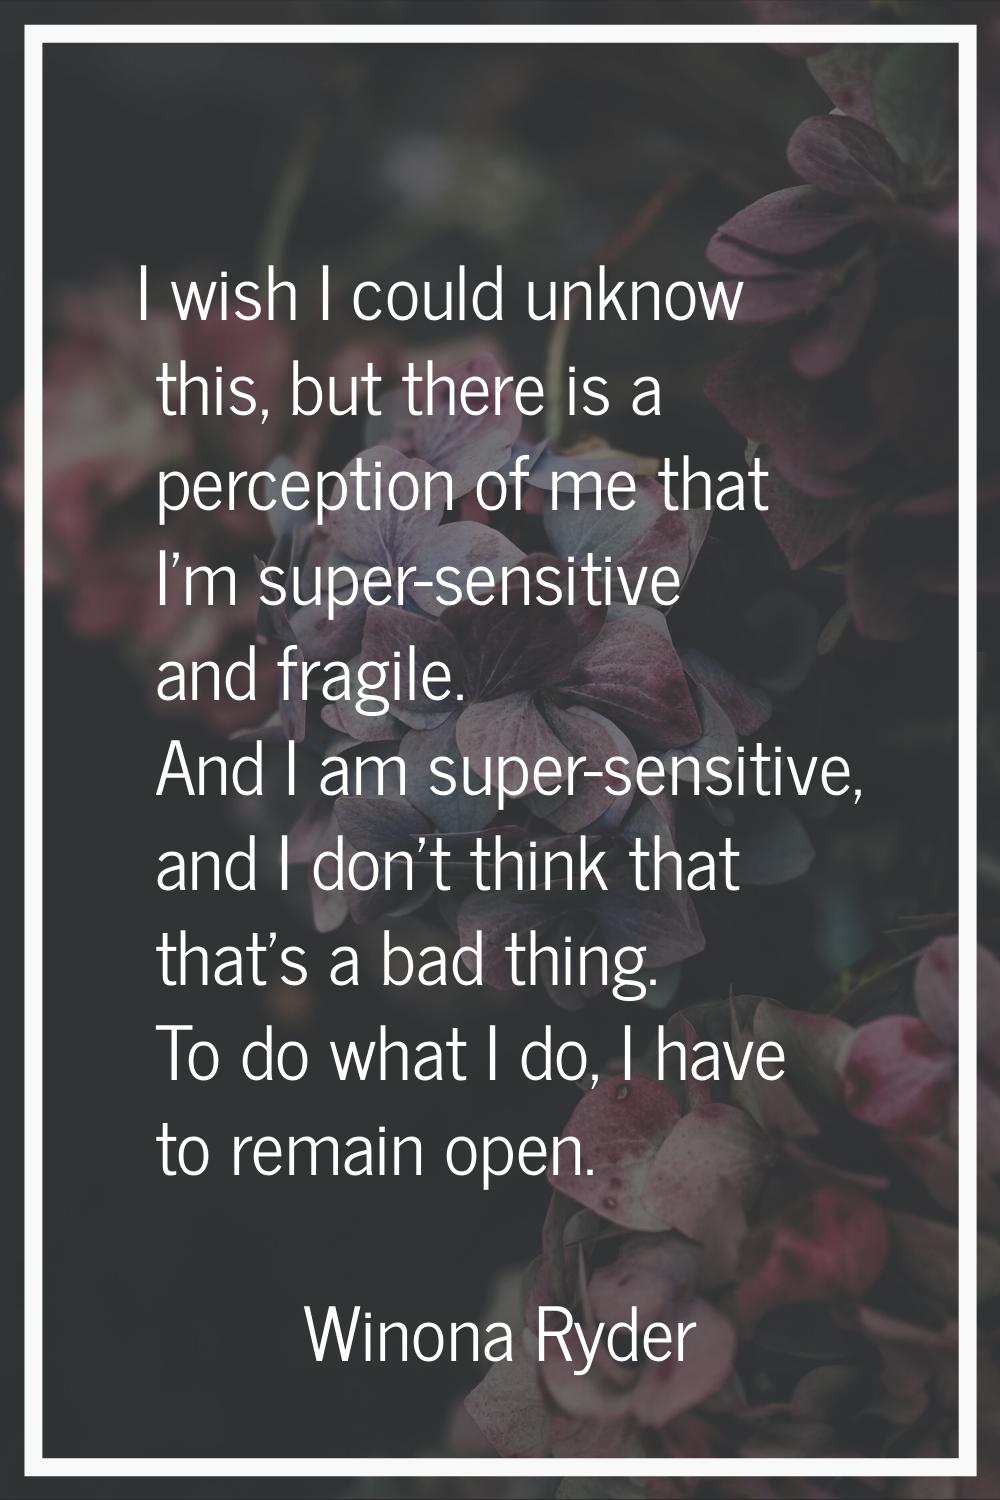 I wish I could unknow this, but there is a perception of me that I'm super-sensitive and fragile. A